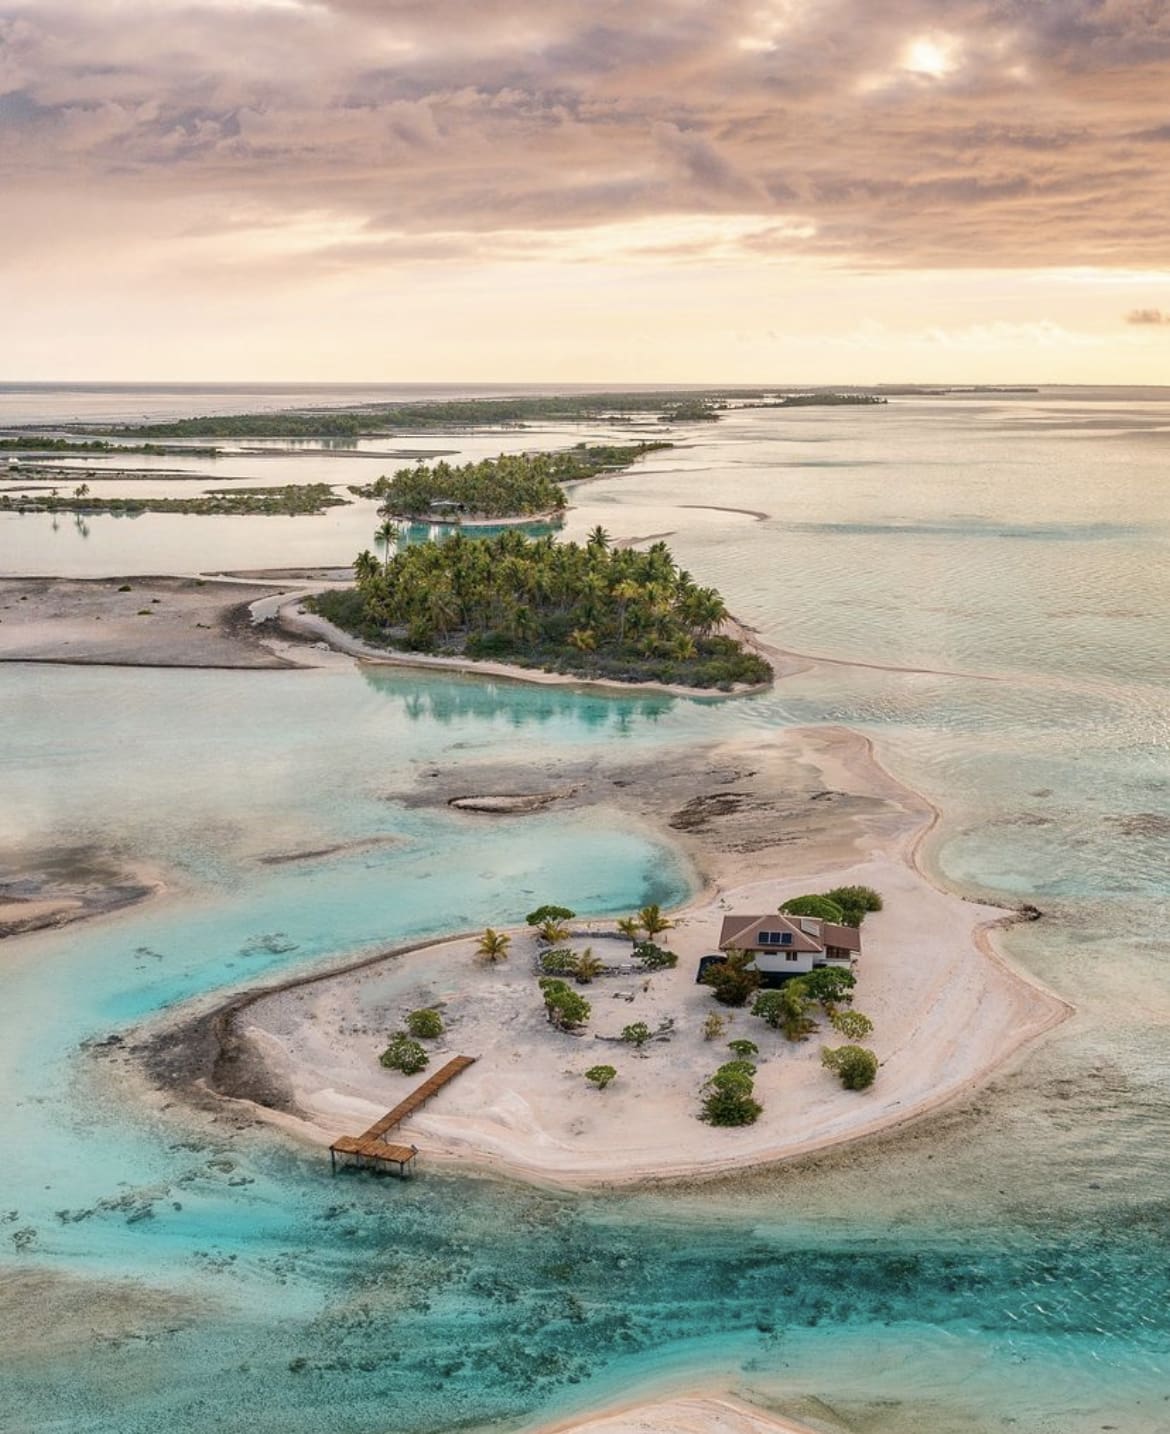 Tikehau Atoll: The Pink Sand Paradise - The 10 Best Places To Scuba Dive In French Polynesia